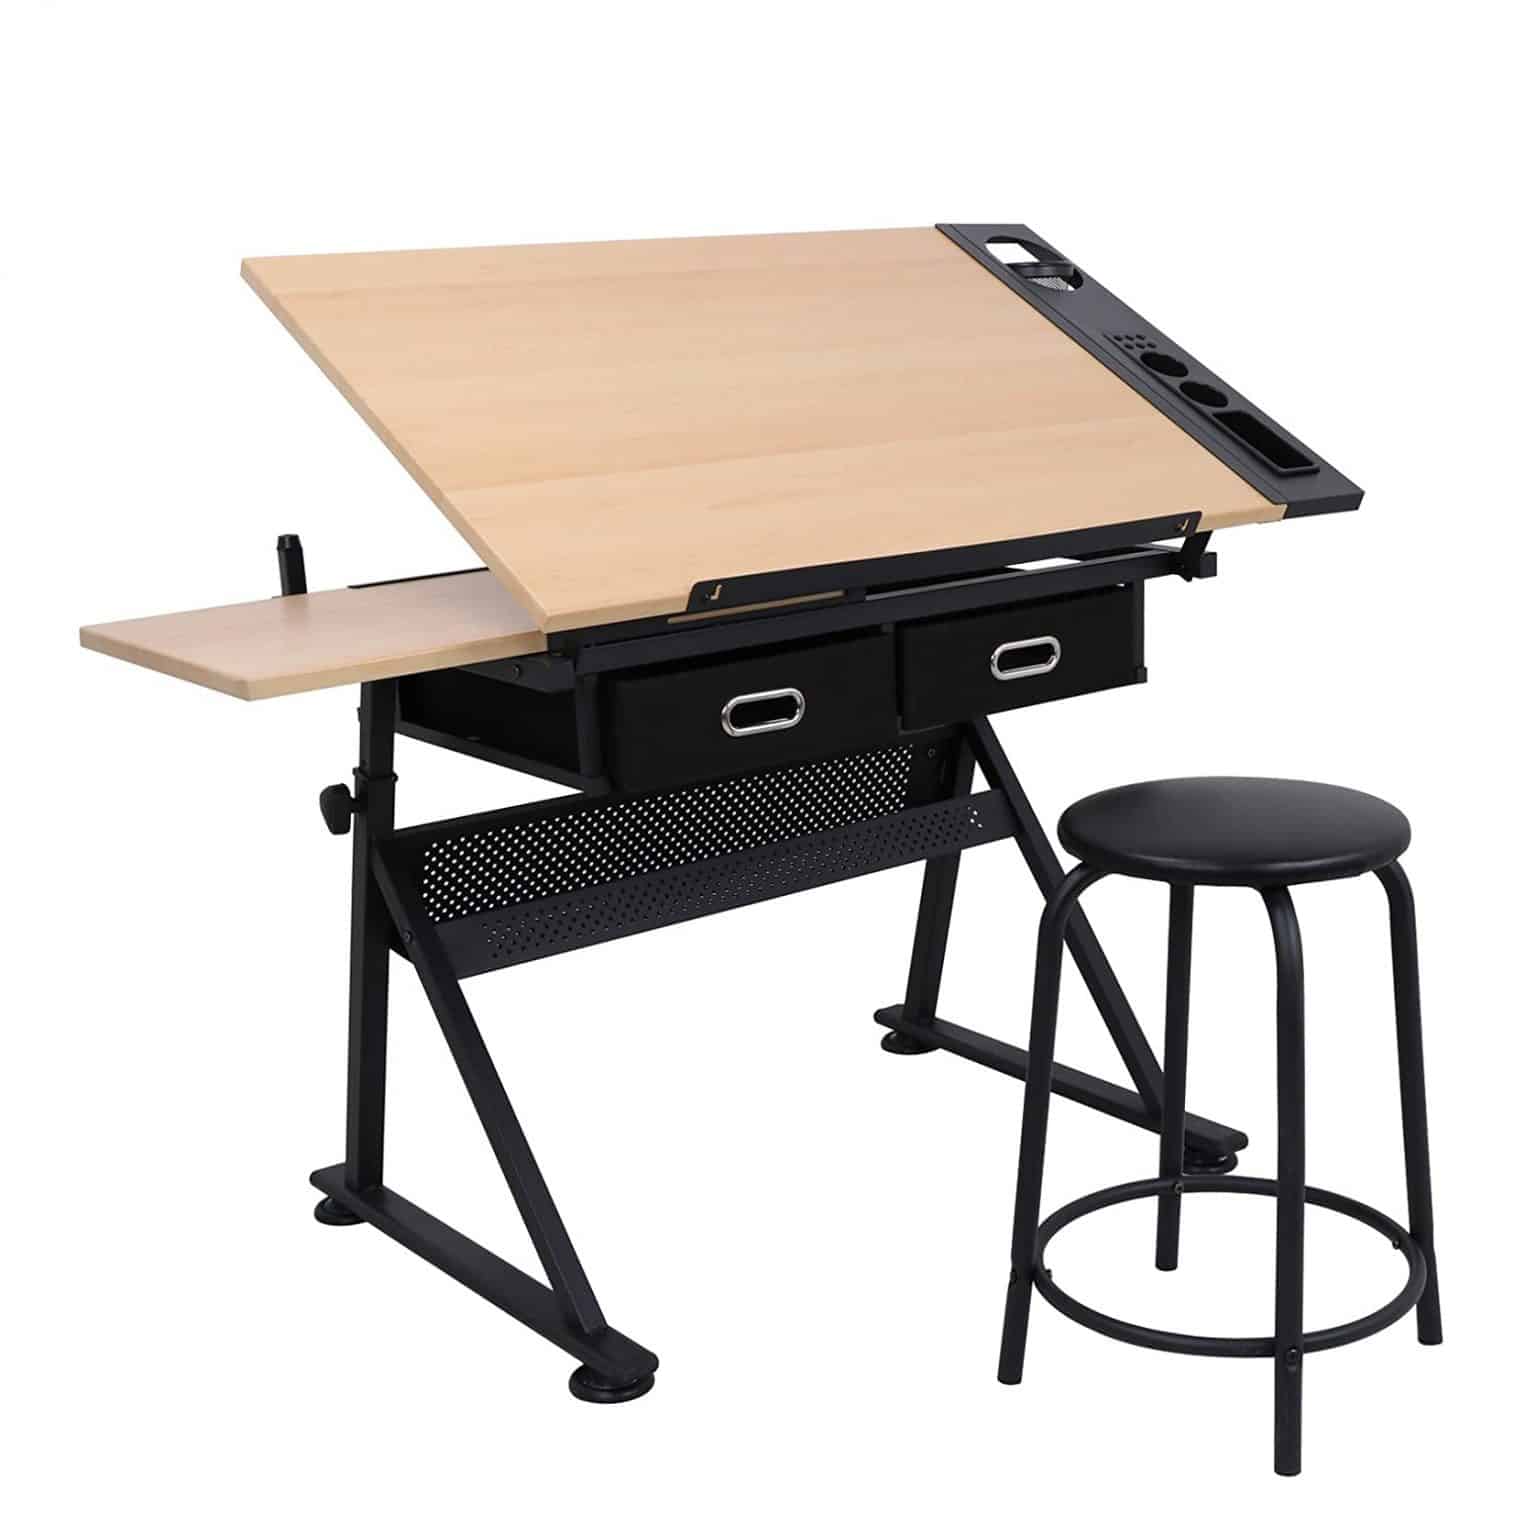 Top 10 Best Craft Tables in 2021 Reviews - Guide Me